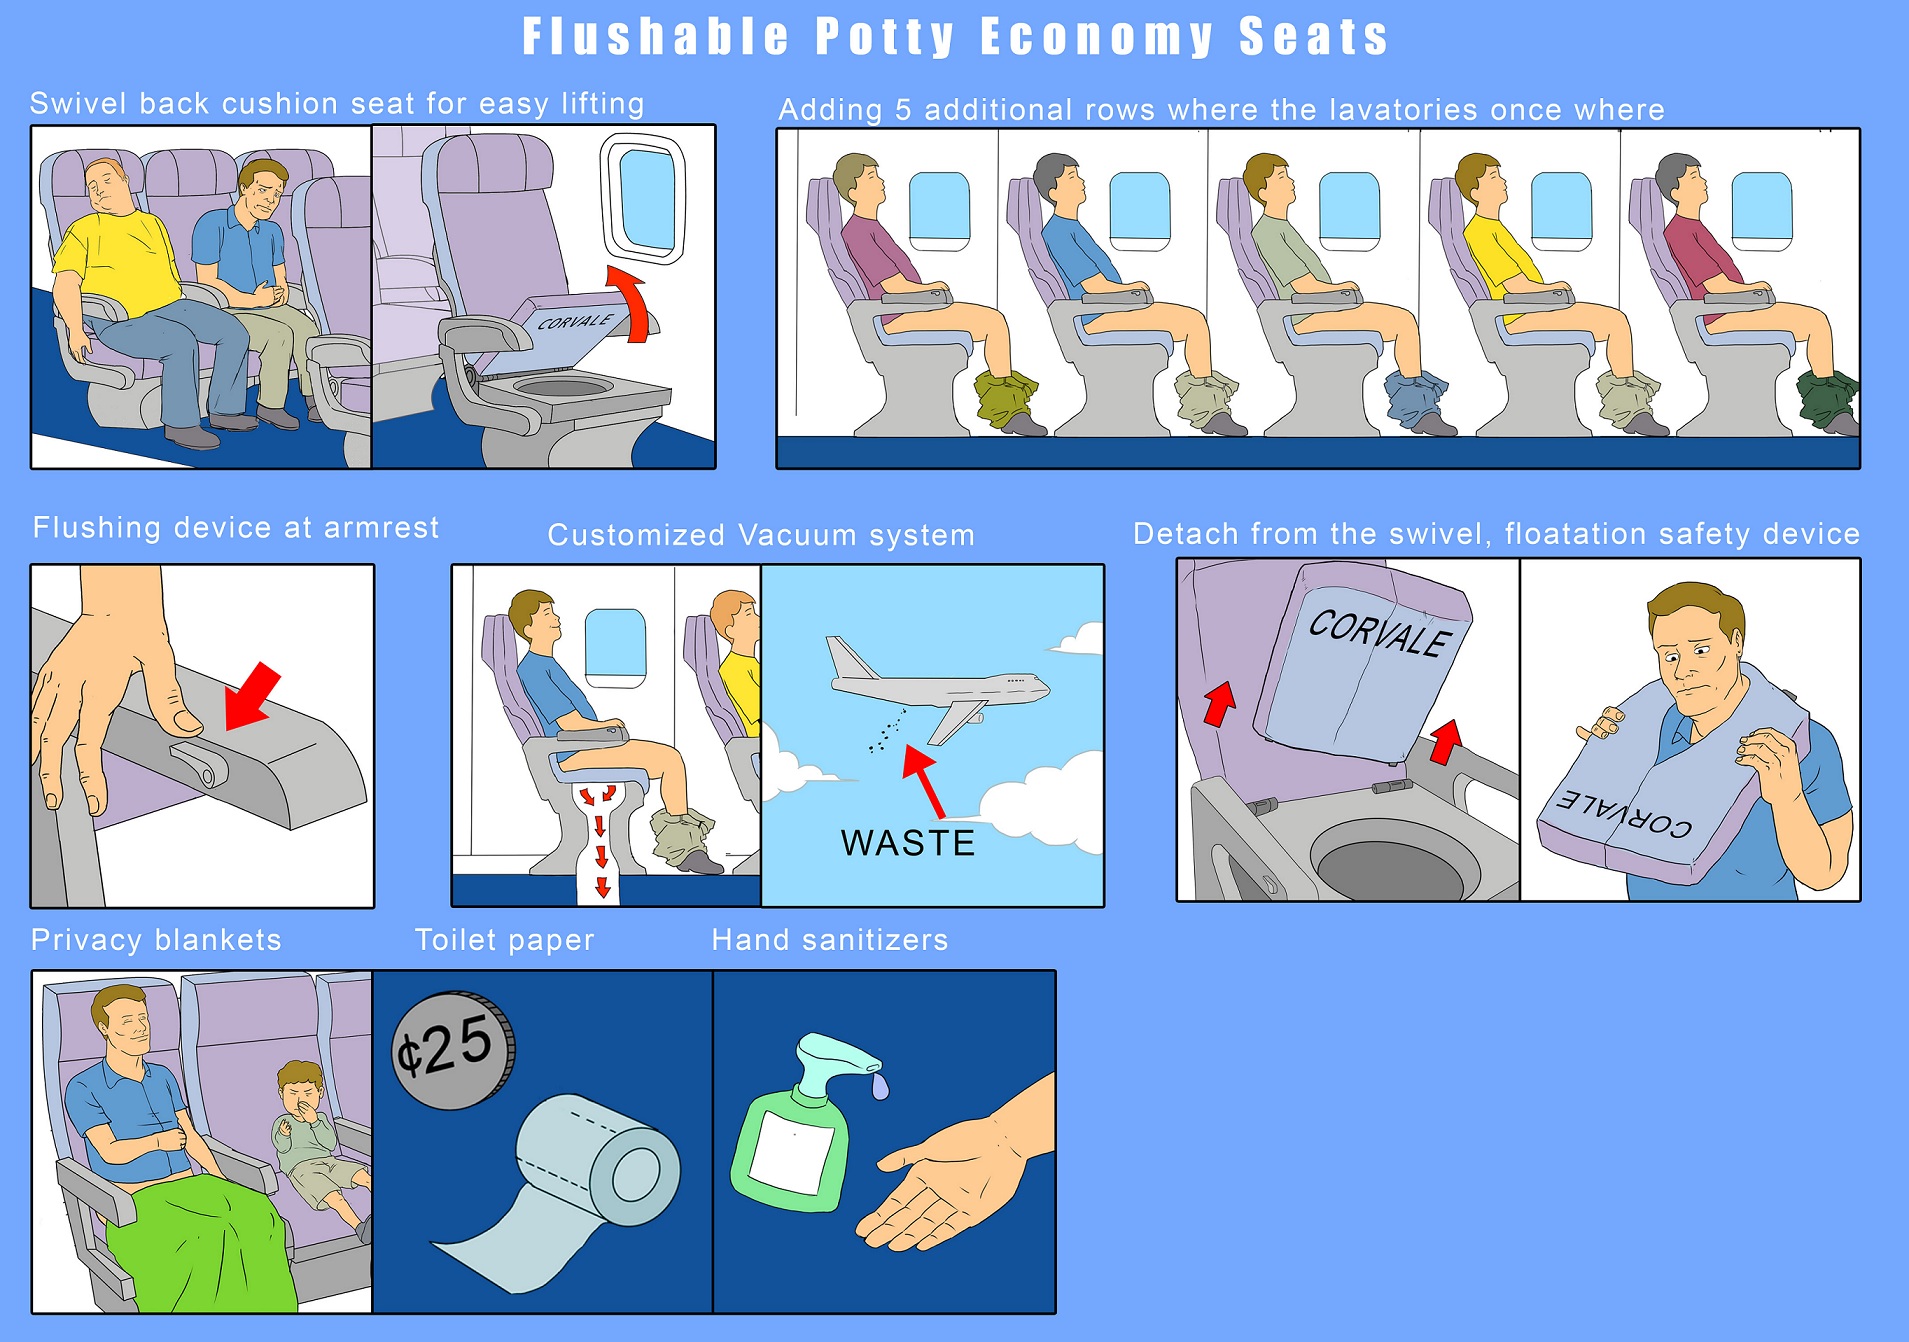 U.S Low Cost Airlines Excited to start Providing Flushable Potty Economy  Seats